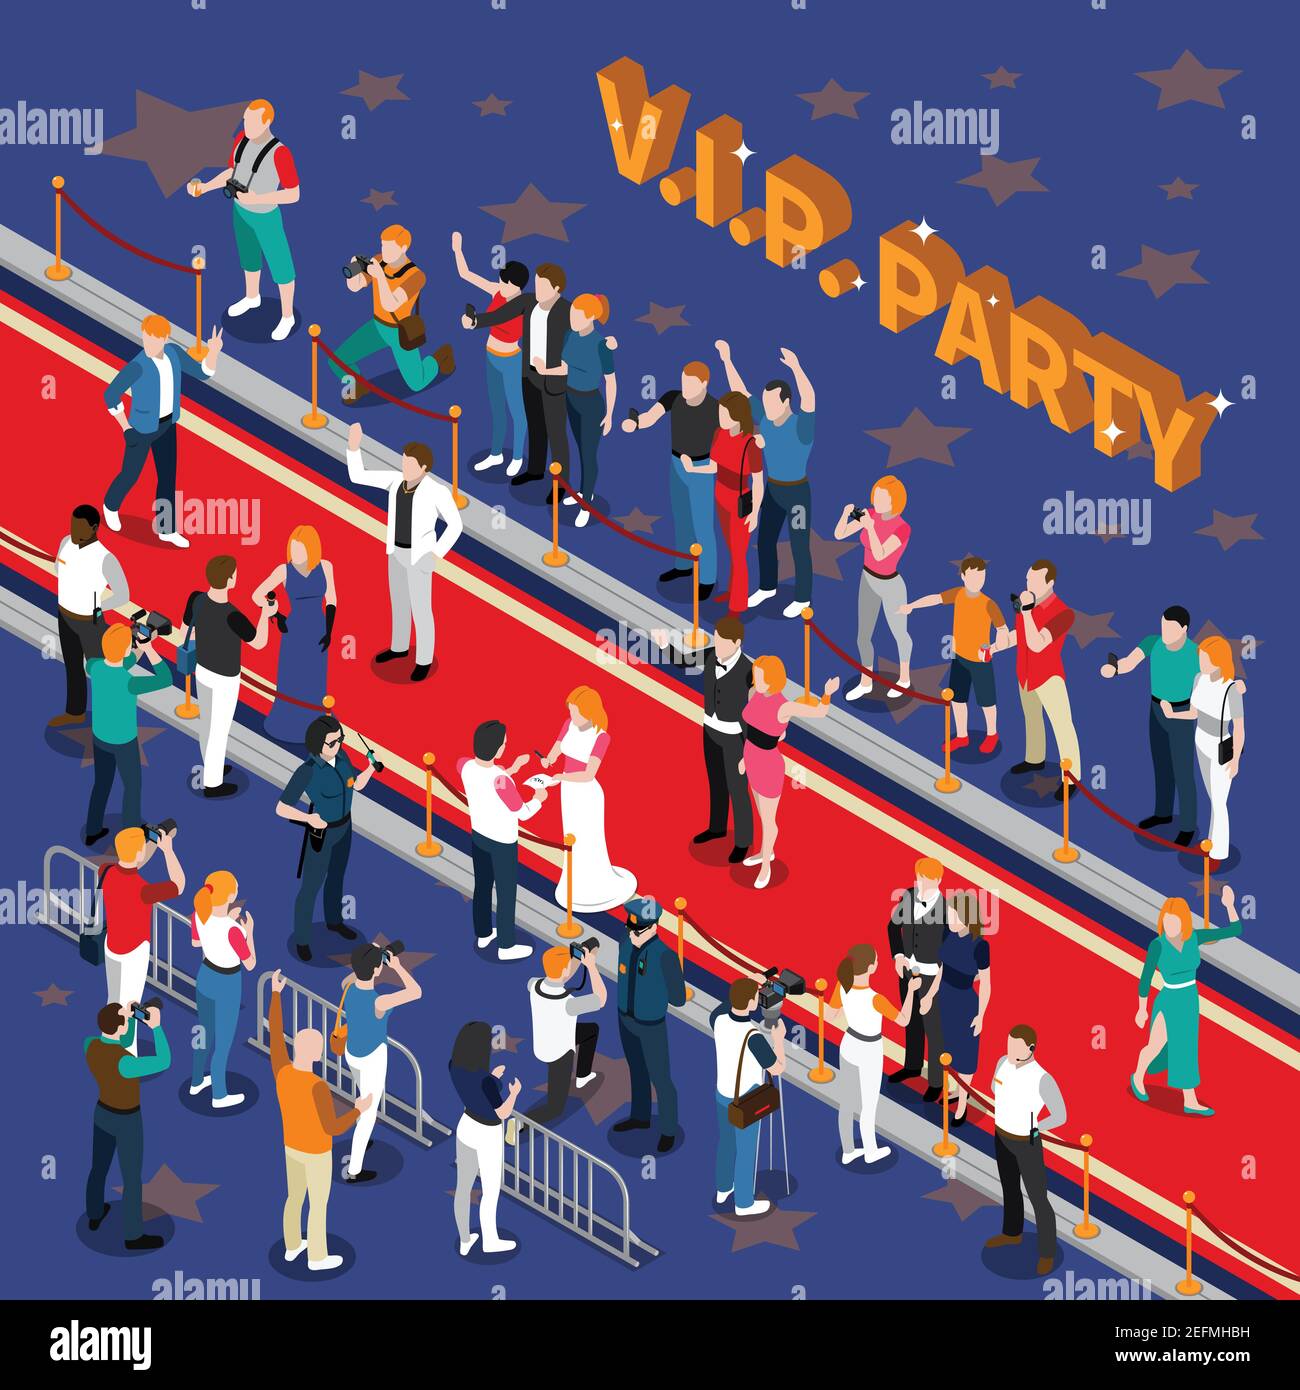 Vip party with celebrities on red carpet photographers admirers on blue background with stars isometric vector illustration Stock Vector